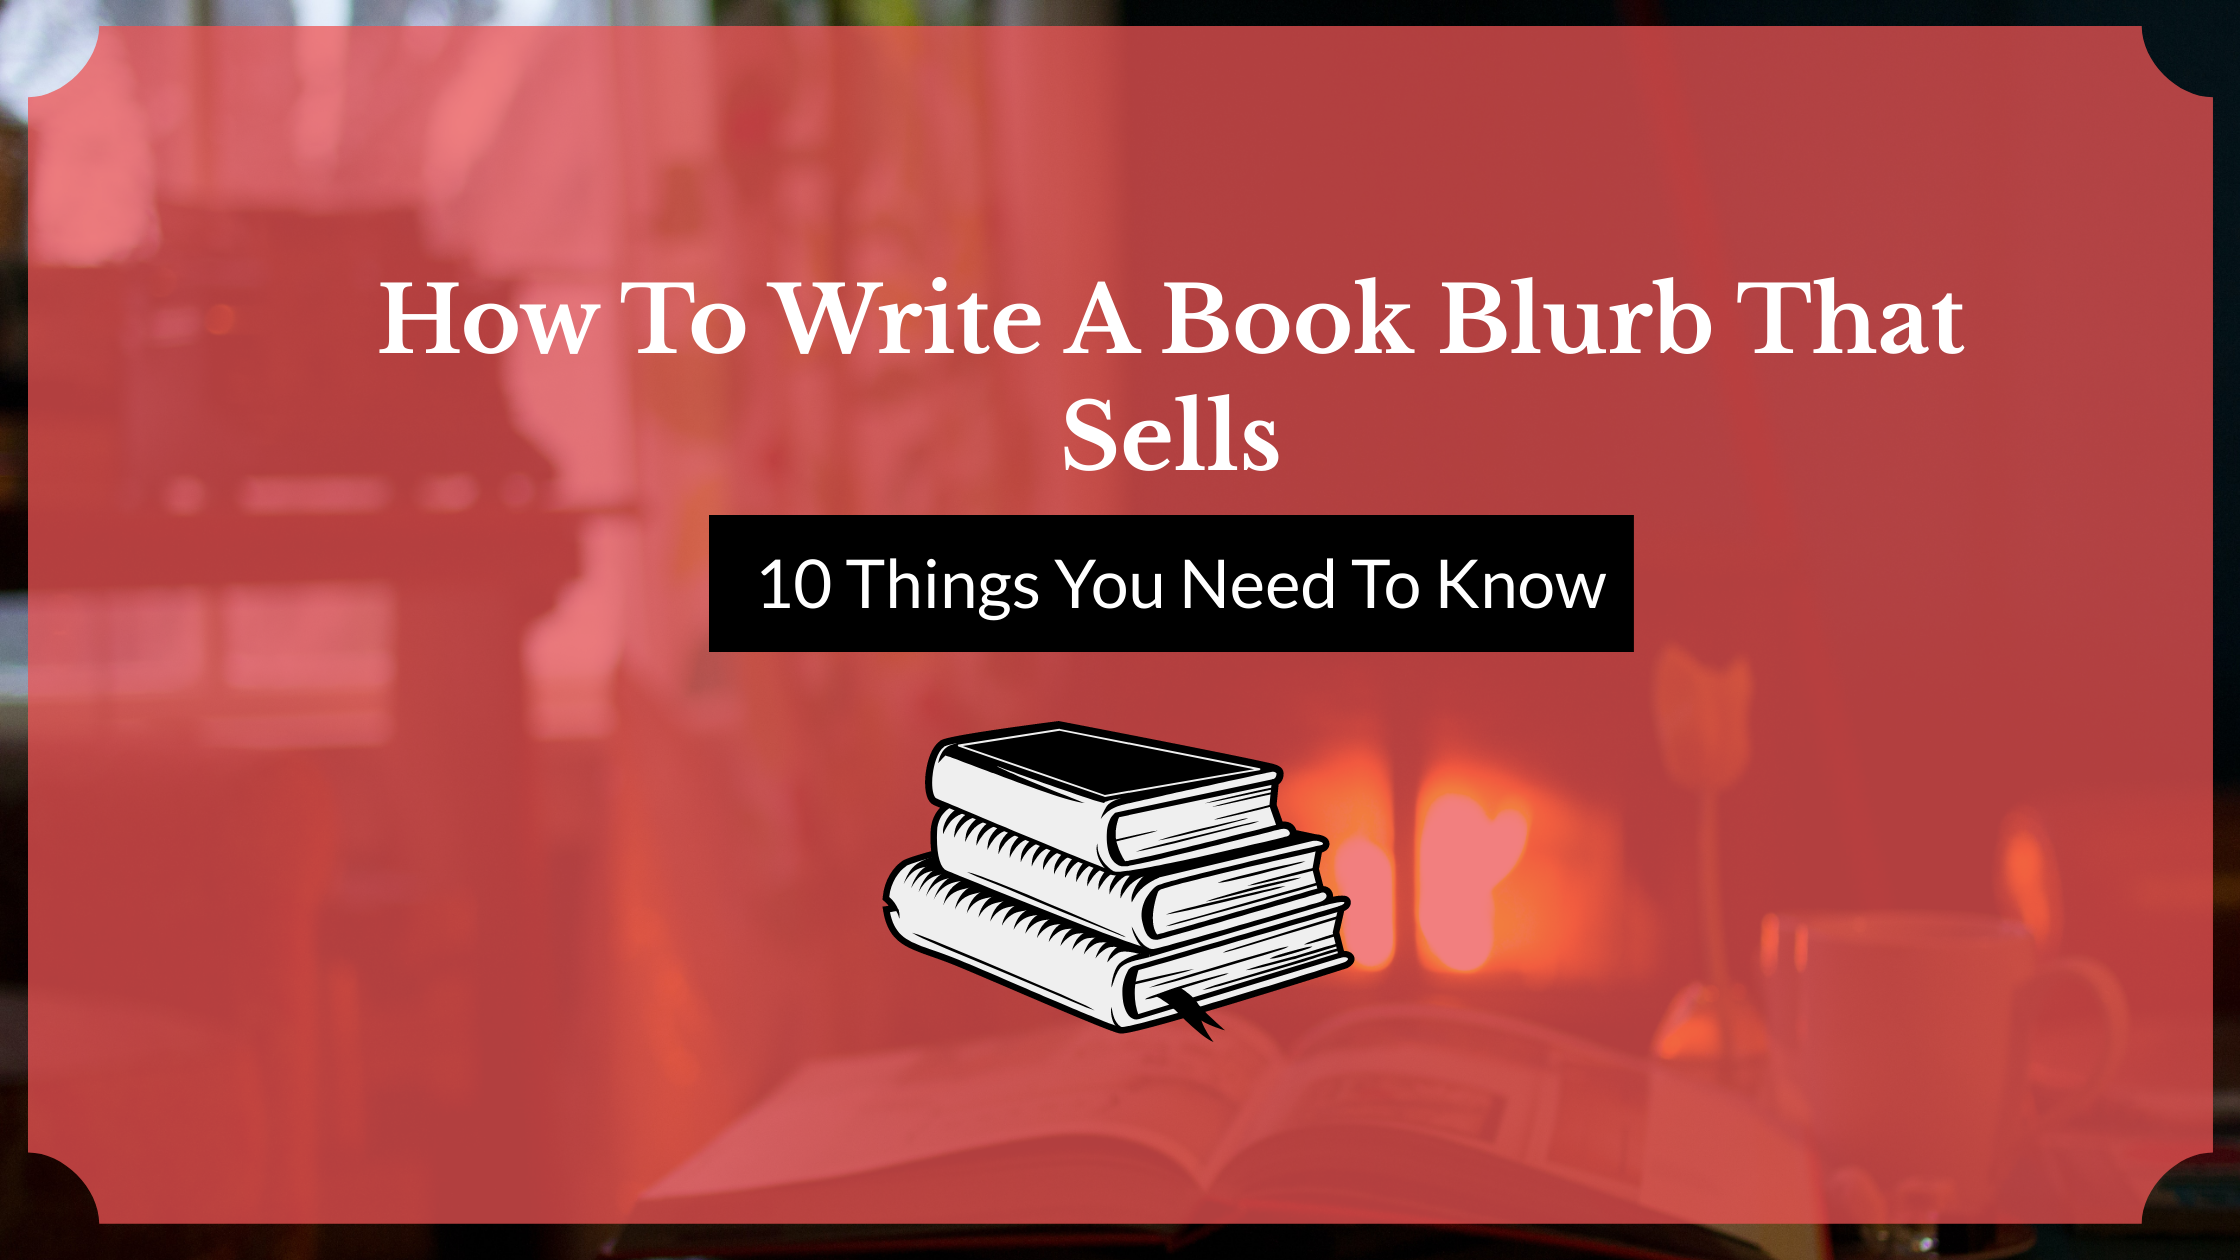 How to Write a Book Blurb That Sells: 10 Things You Need to Know